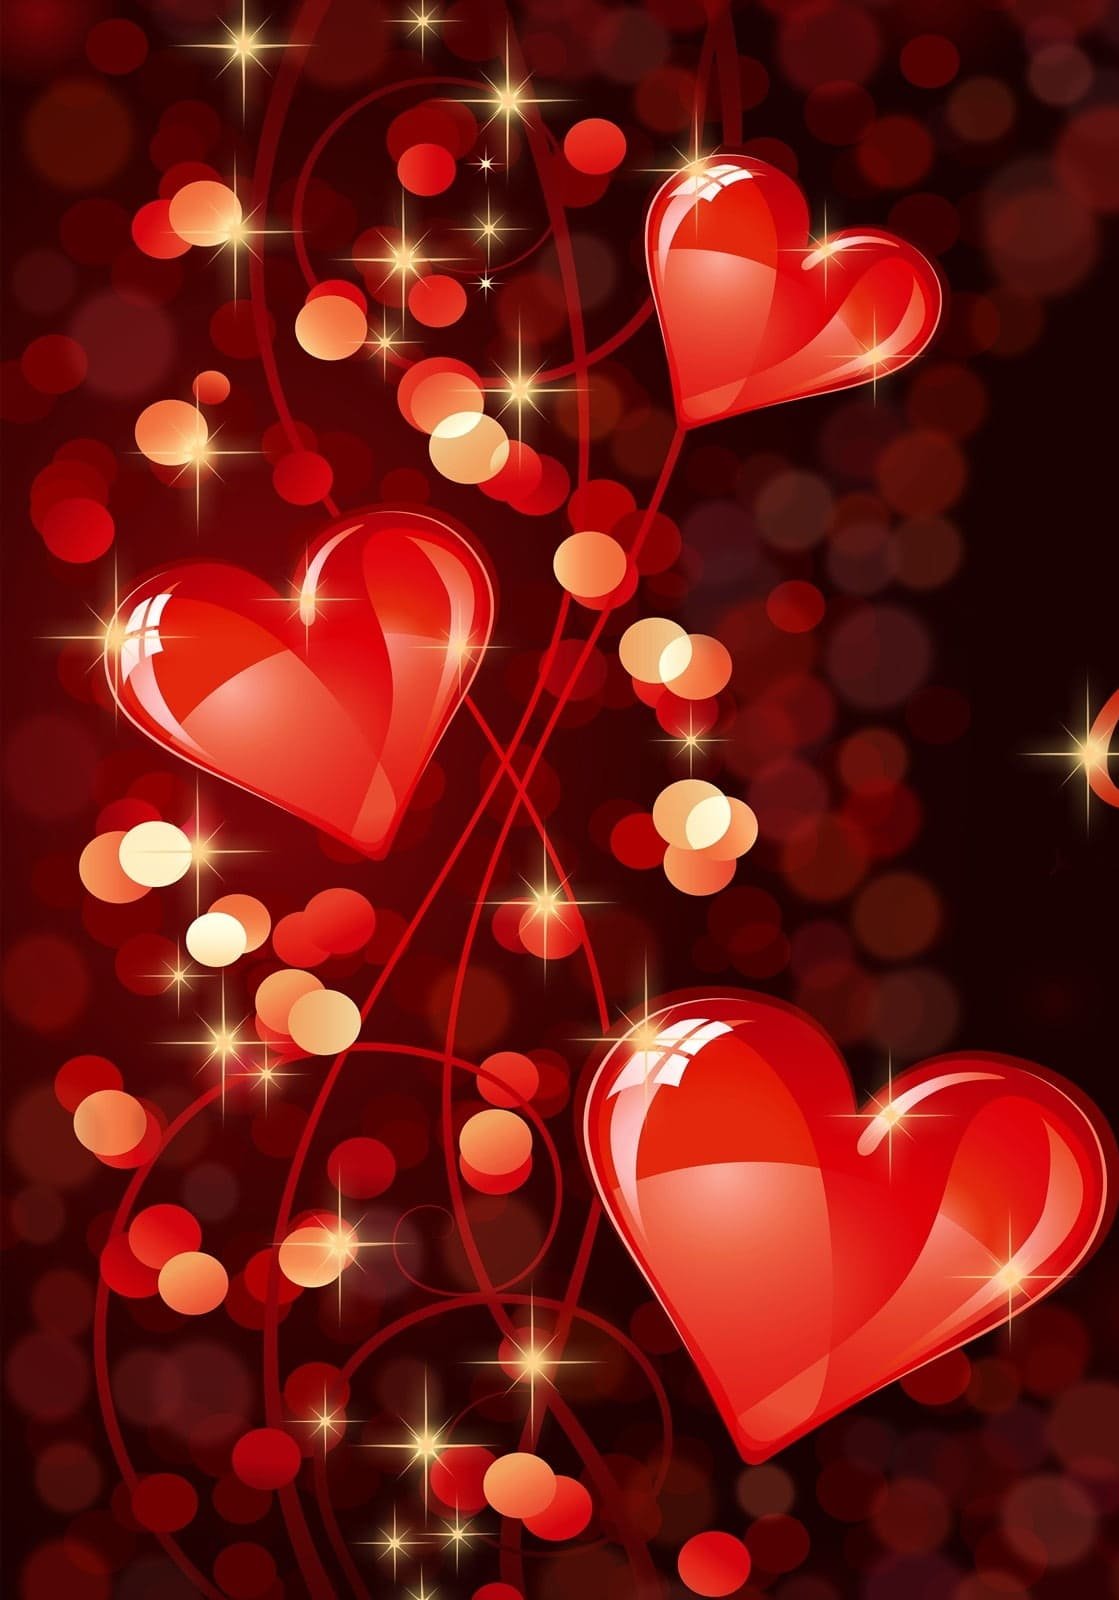 HD wallpaper Happy Valentines Day cards romantic love hearts